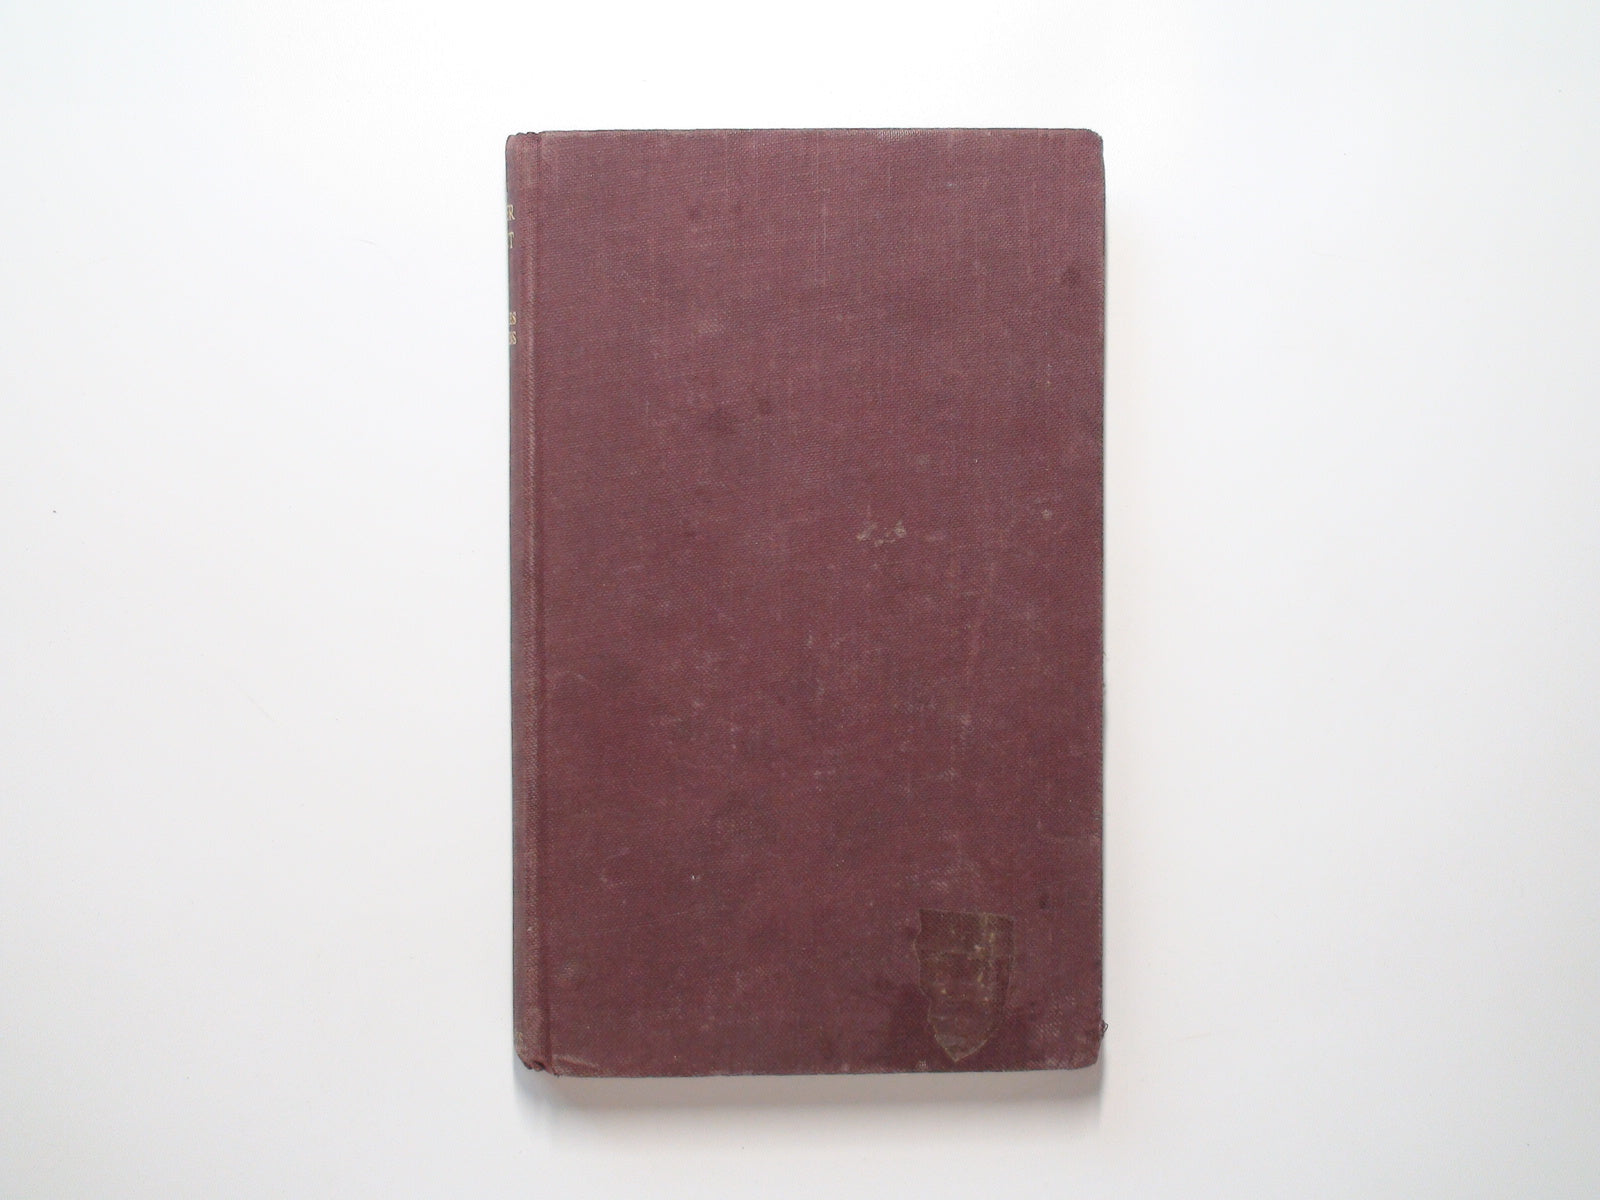 Oliver Twist, by Charles Dickens, No D/J, Collins, 1966